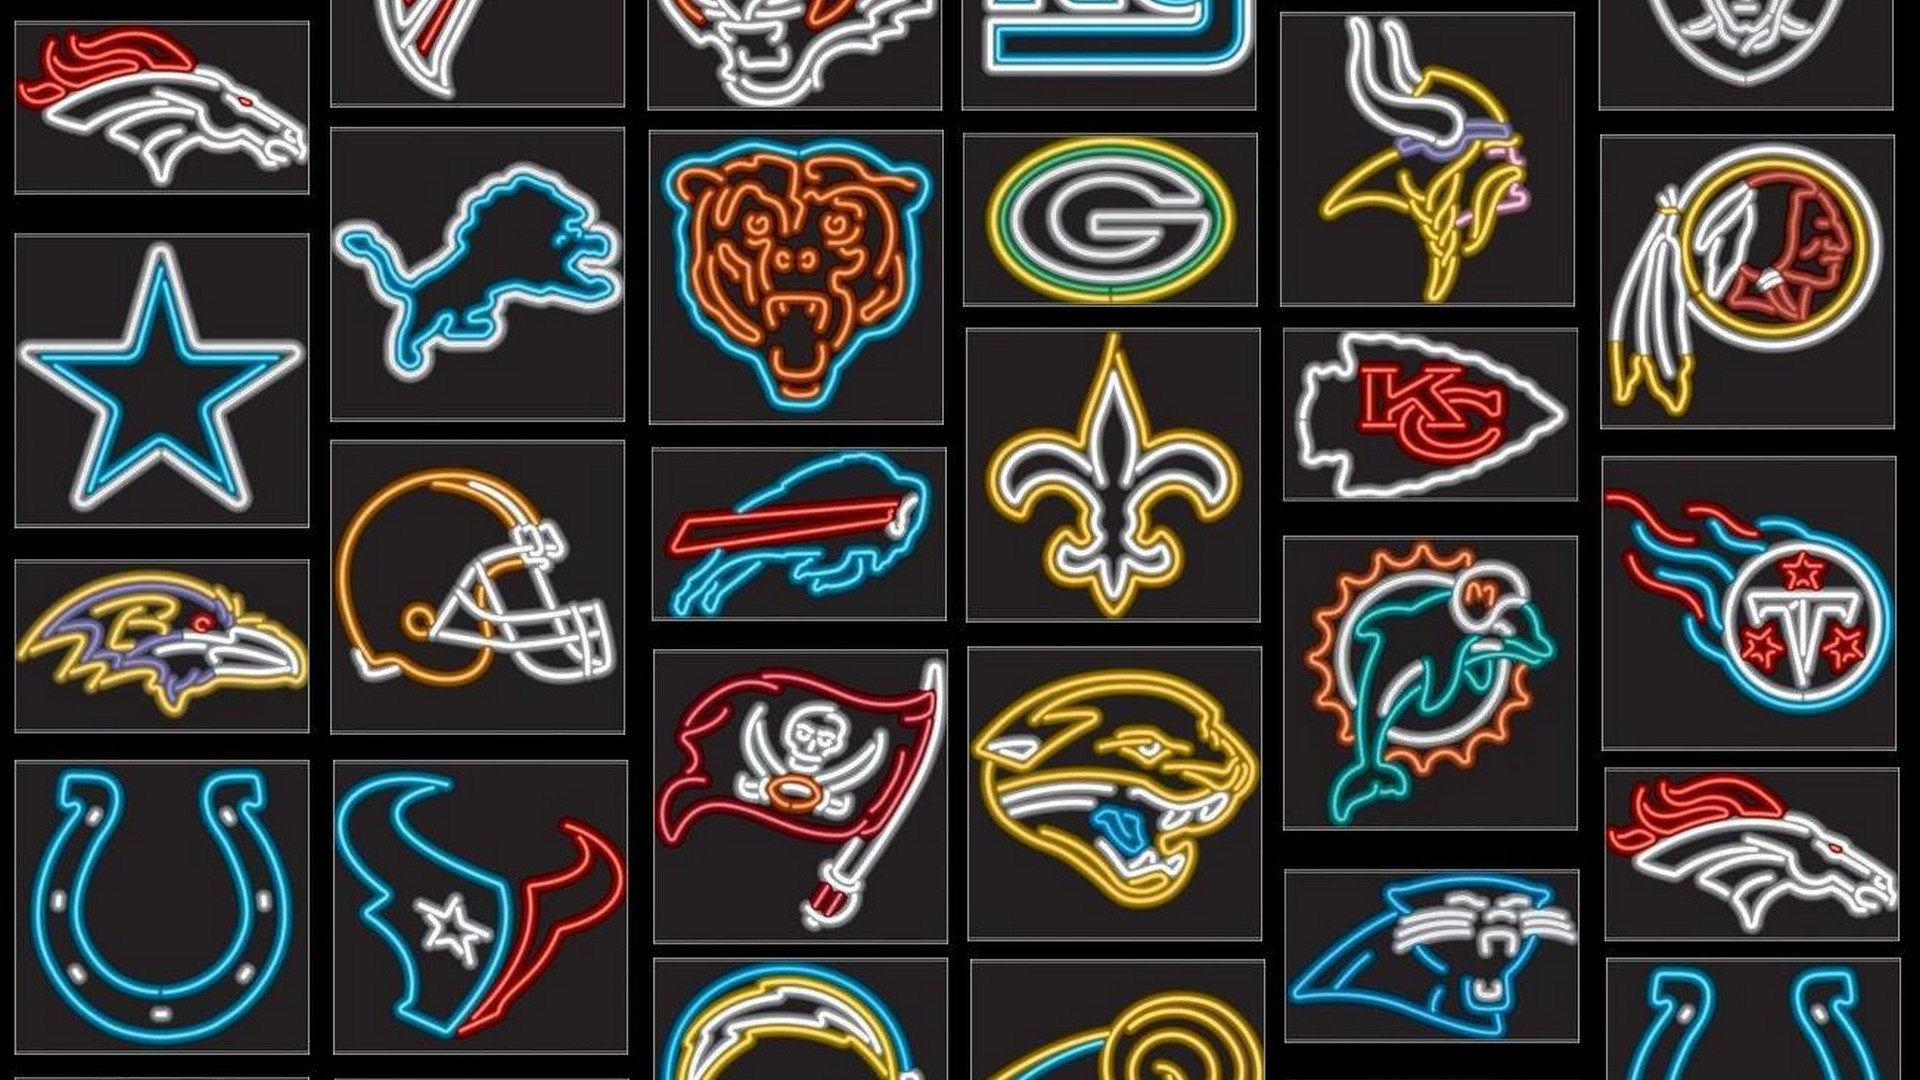 Wallpapers NFL 1920x1080